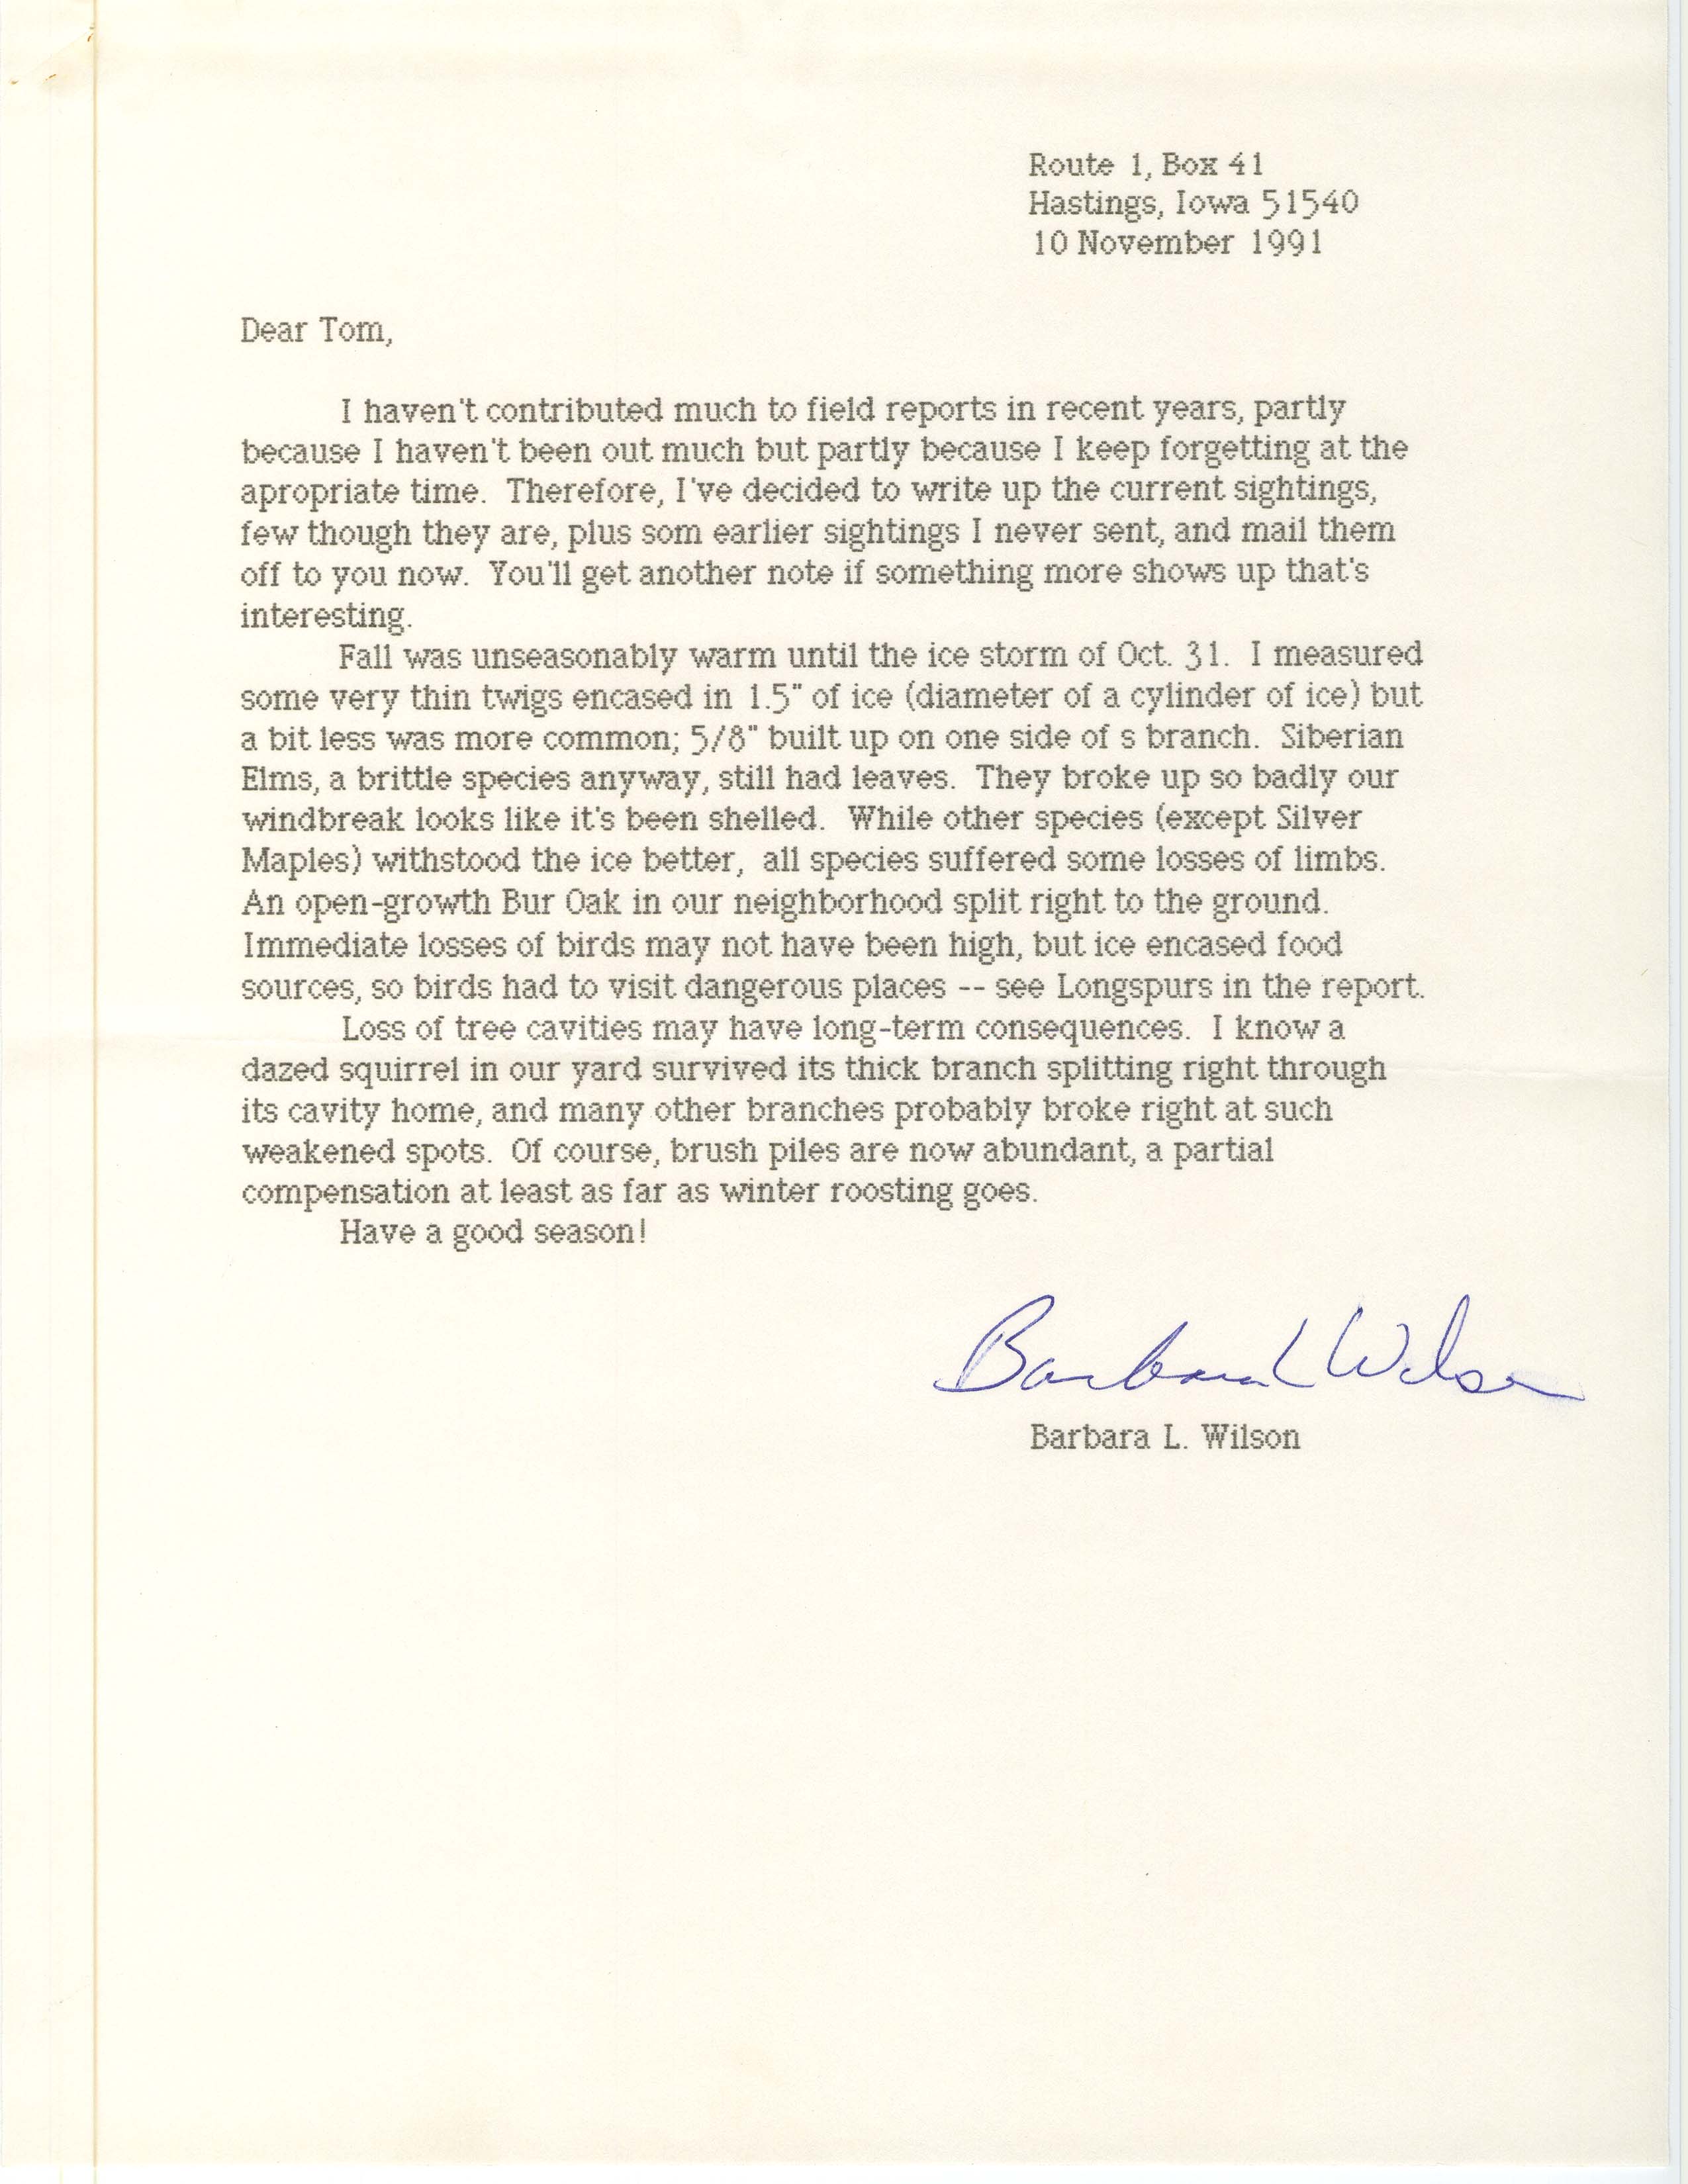 Field notes and Barbara L. Wilson letter to Thomas H. Kent, November 10, 1991